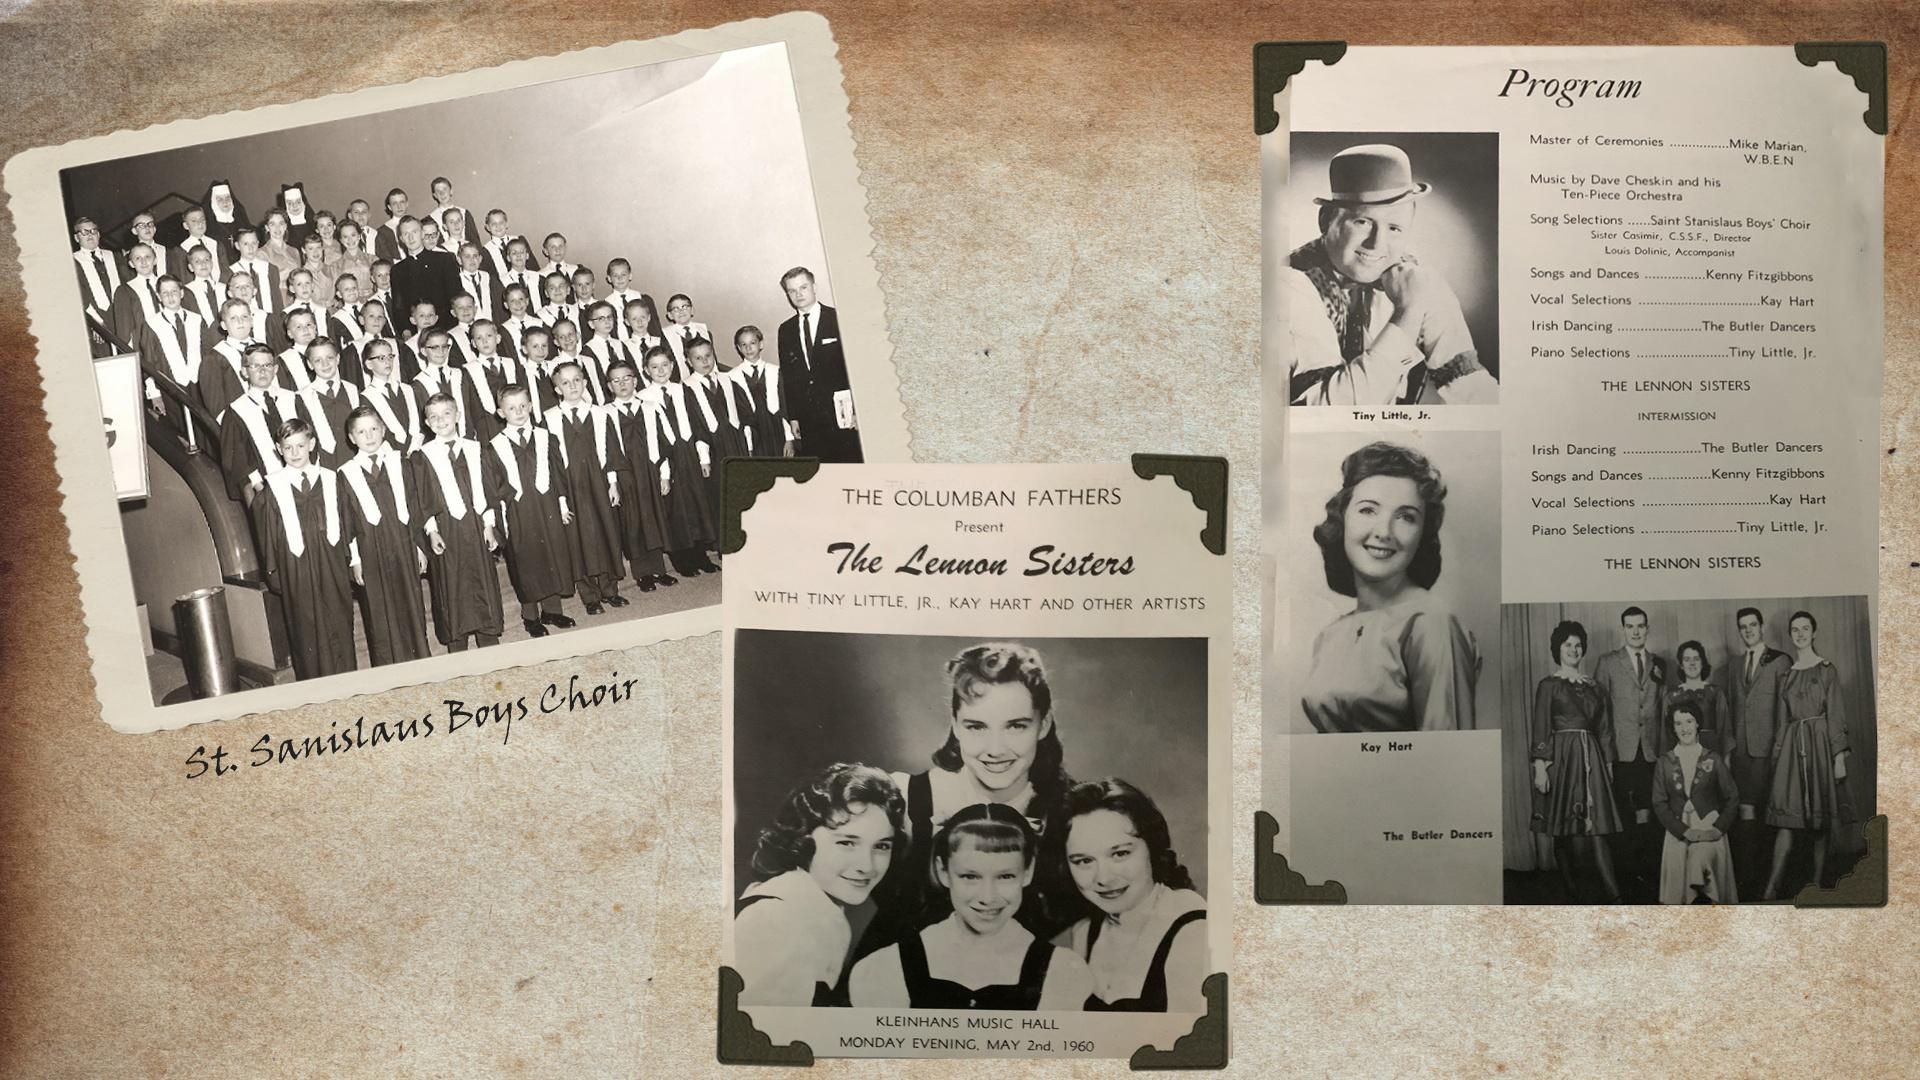 Memorabilia from St. Stanislaus Boys Choir and the Lennon Sister from 1960 performance at Kleinhans Music Hall